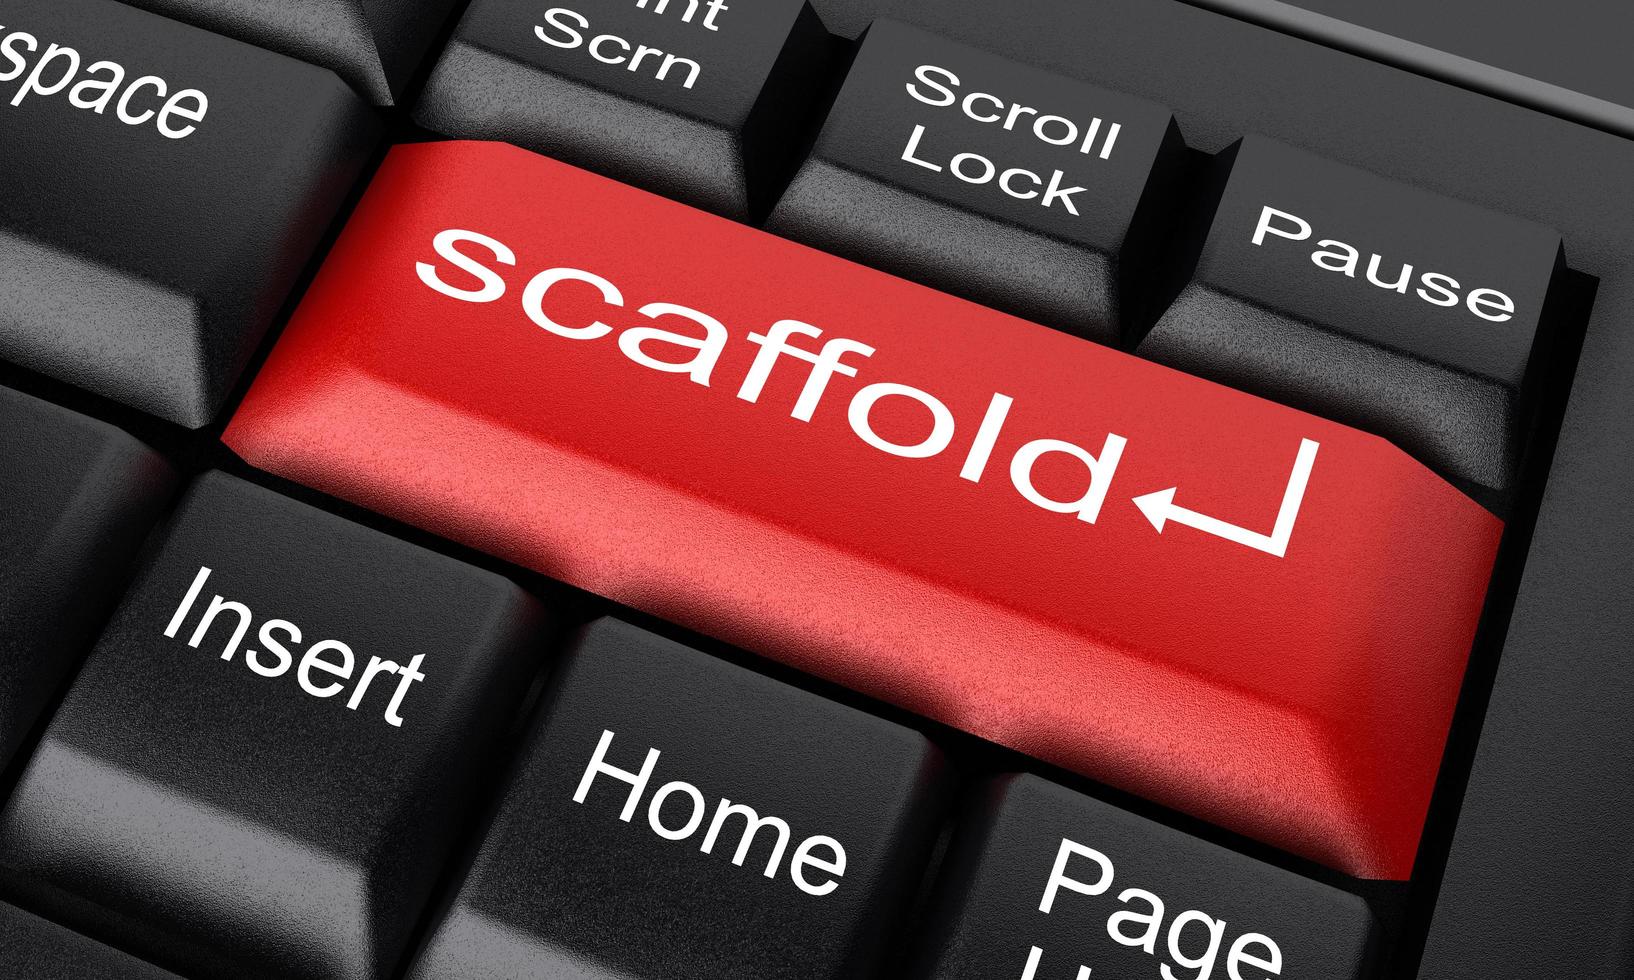 scaffold word on red keyboard button photo